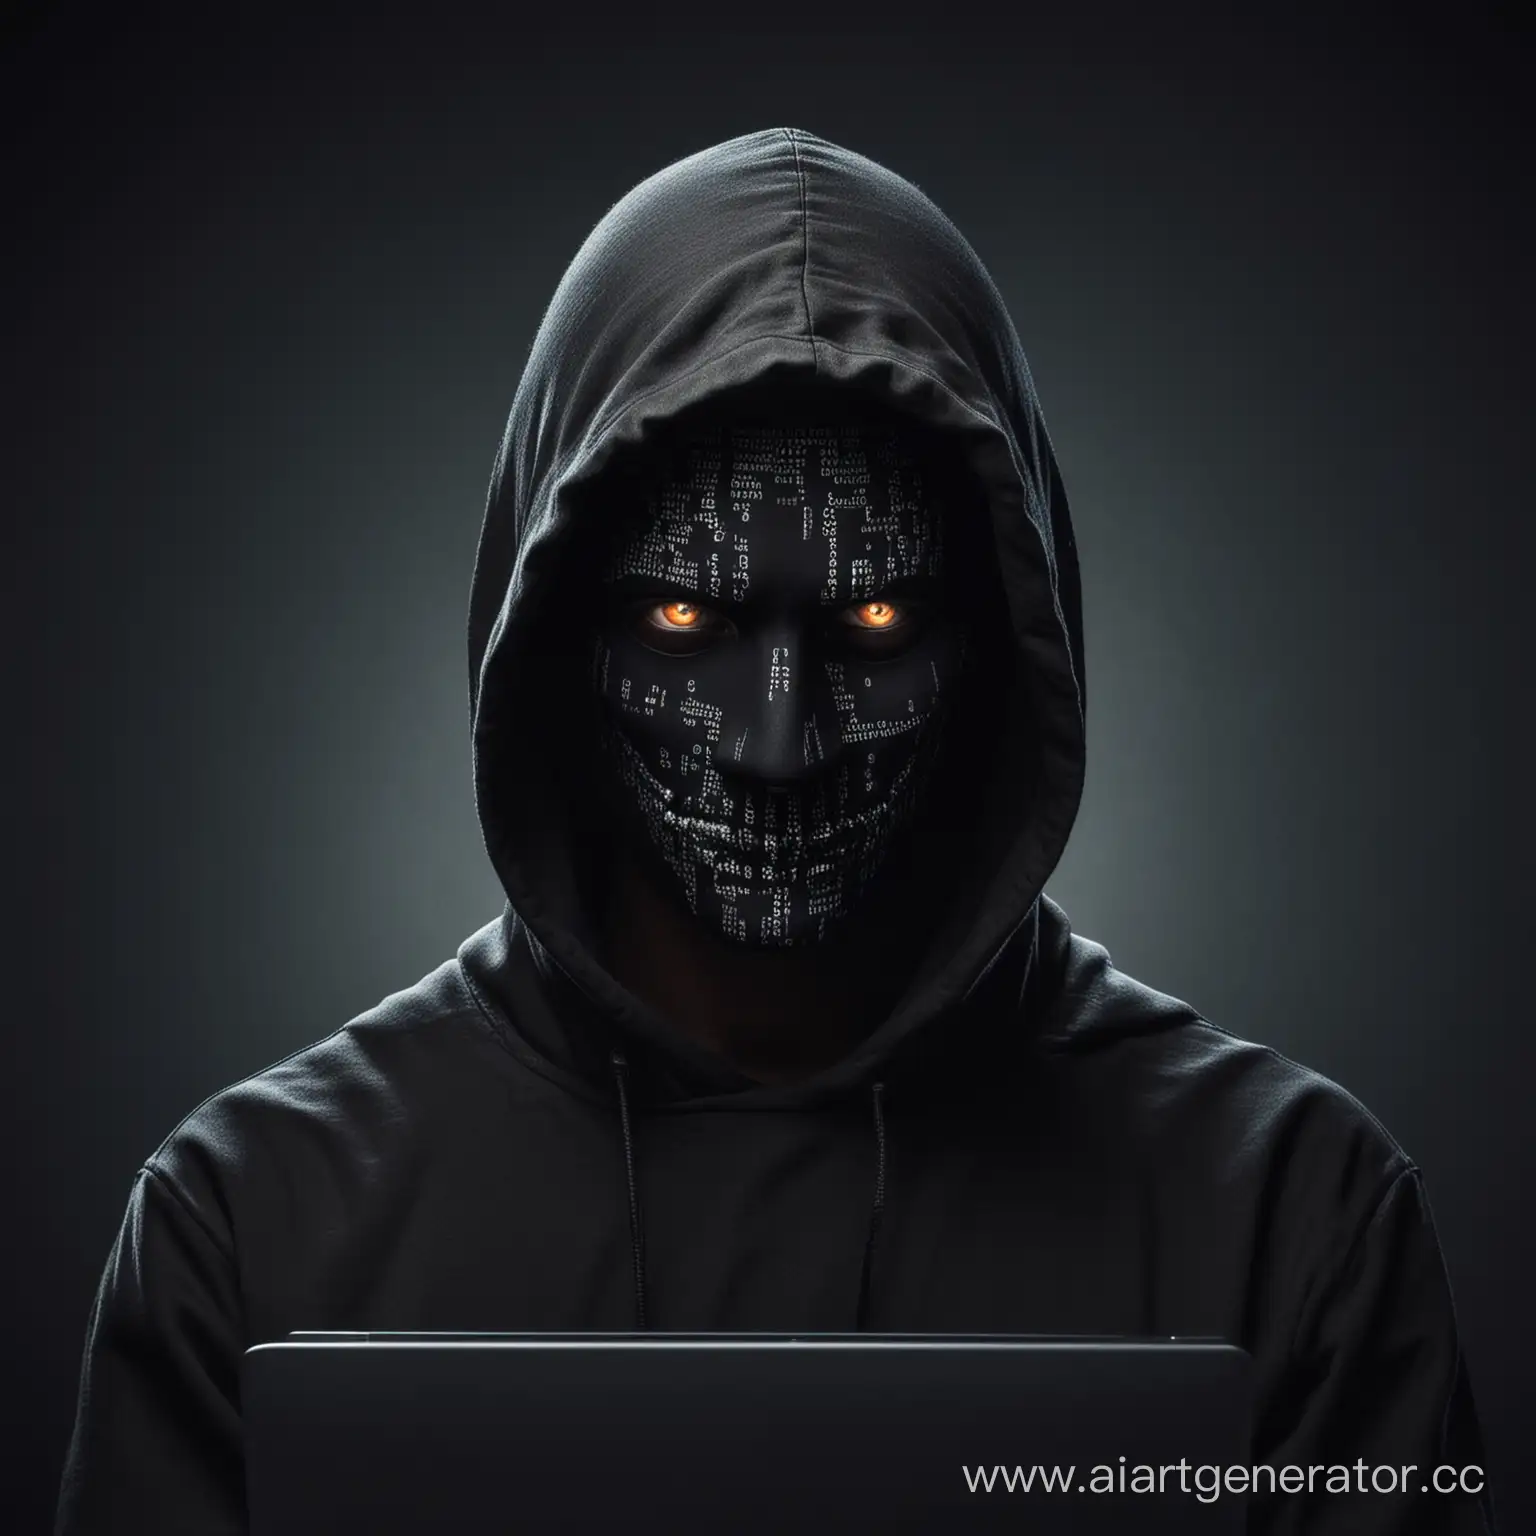 Sinister-Black-Hacker-Engaged-in-Malicious-Data-Work-and-Programming